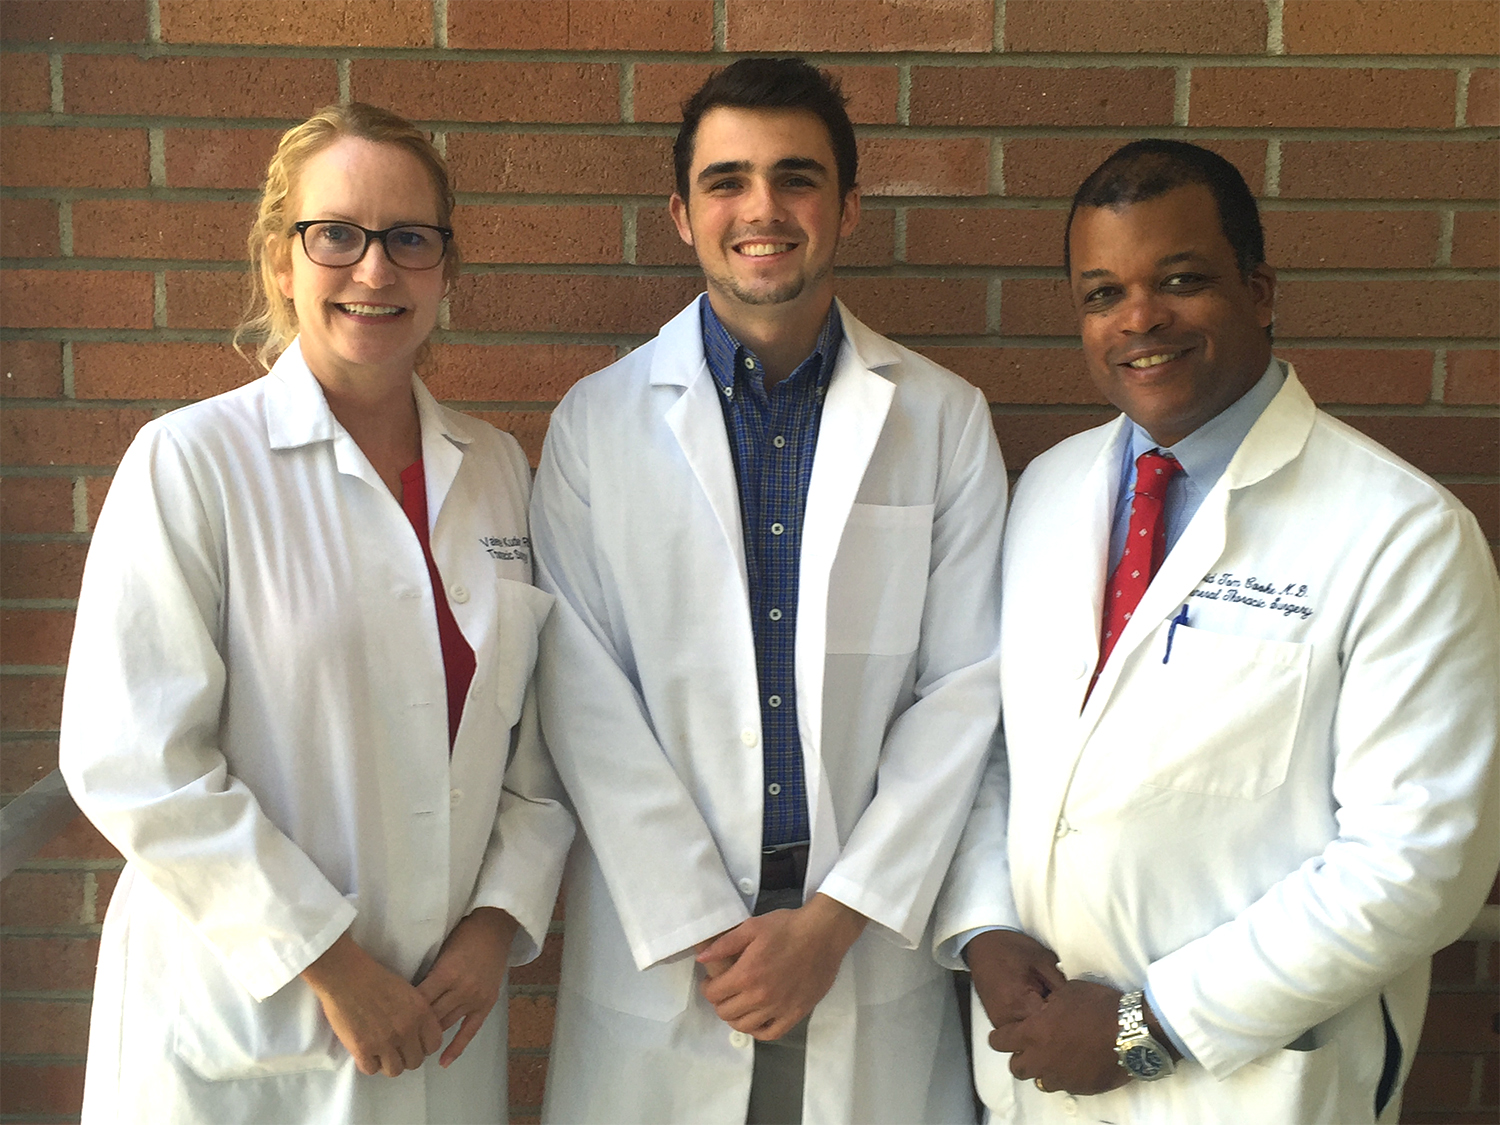 Connor Grant (middle) stands with a couple of his mentors from UC Davis Health.